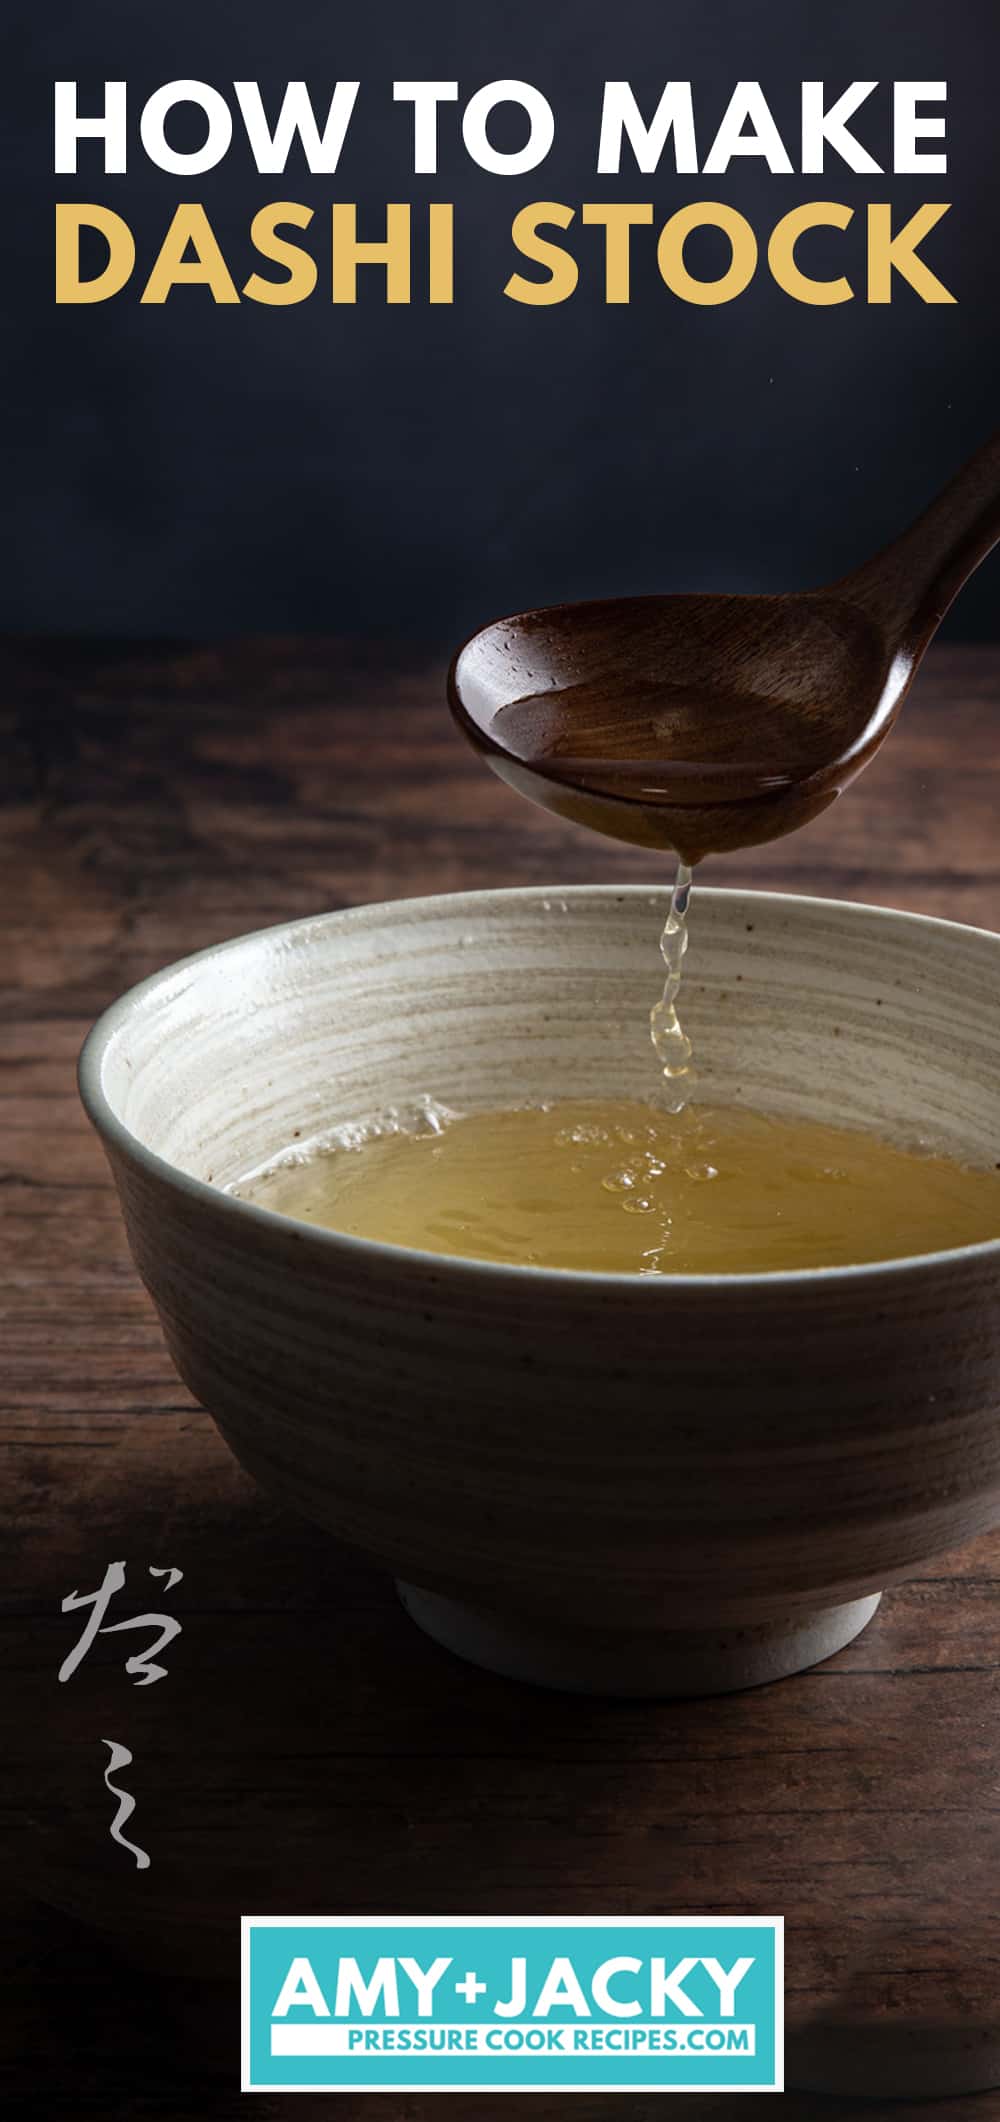 How to Make Dashi (だし) Guide - Tested by Amy + Jacky